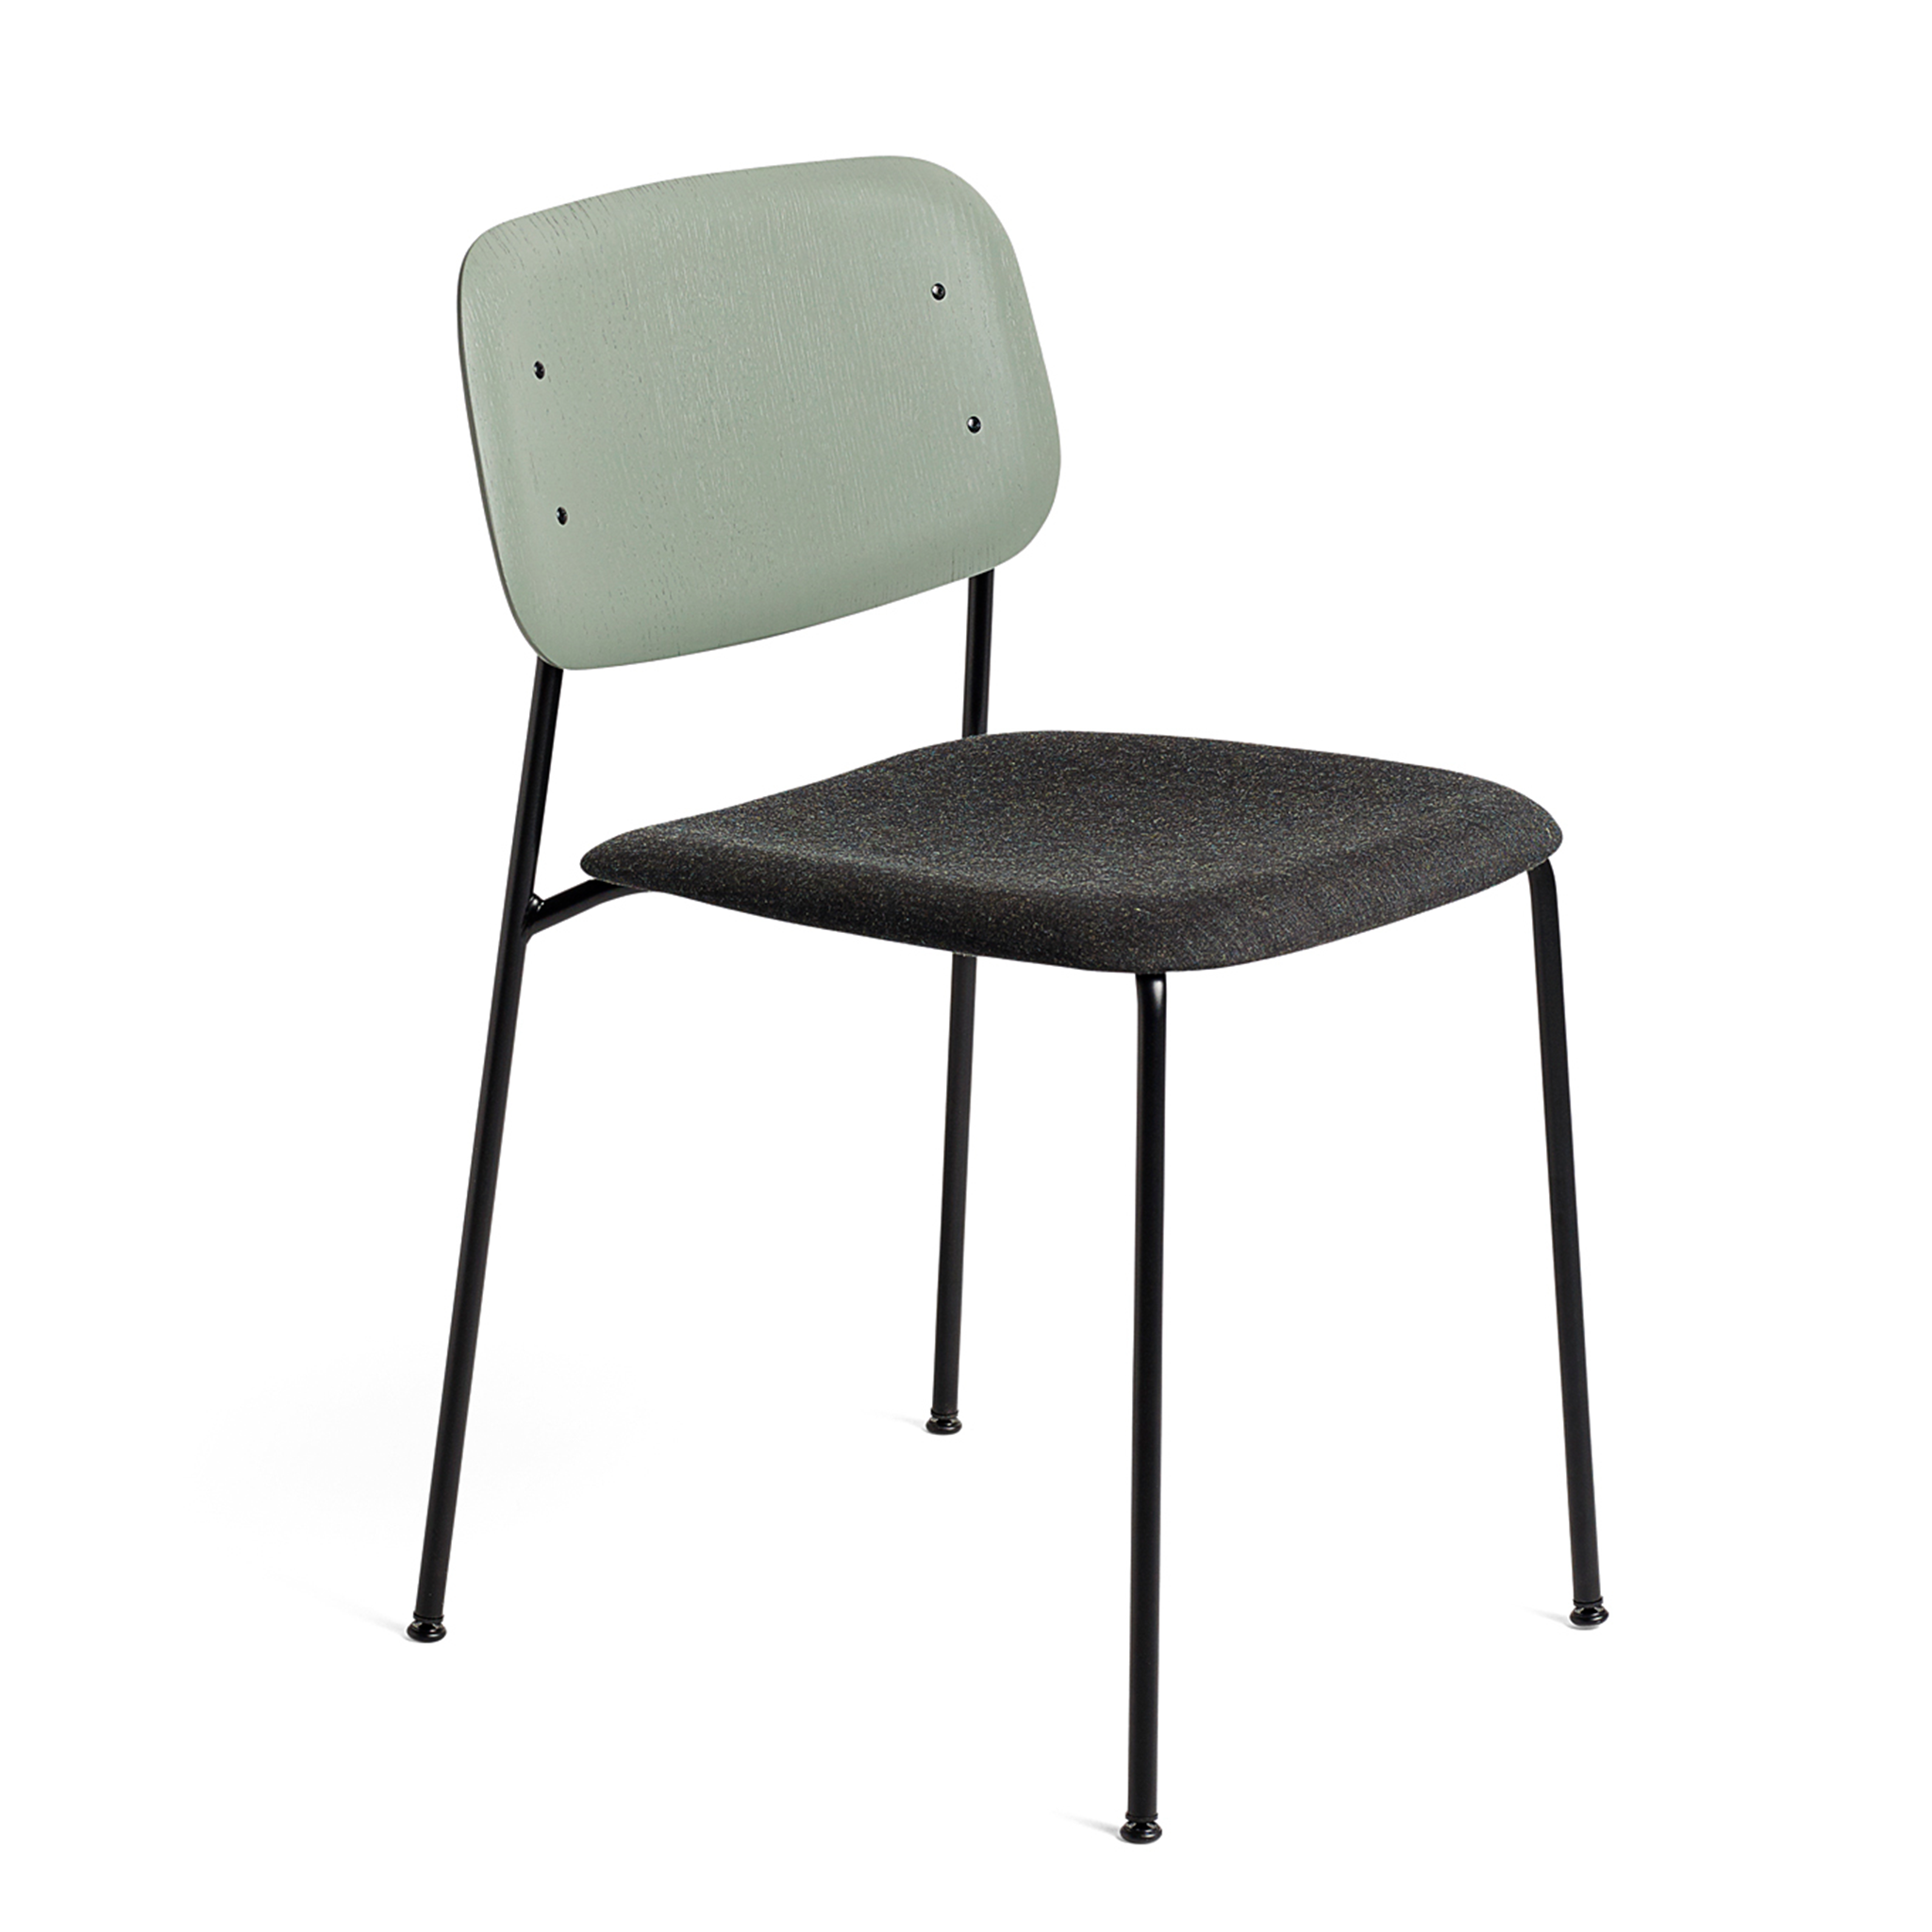 Soft Edge 40 Chair Upholstered by Hay